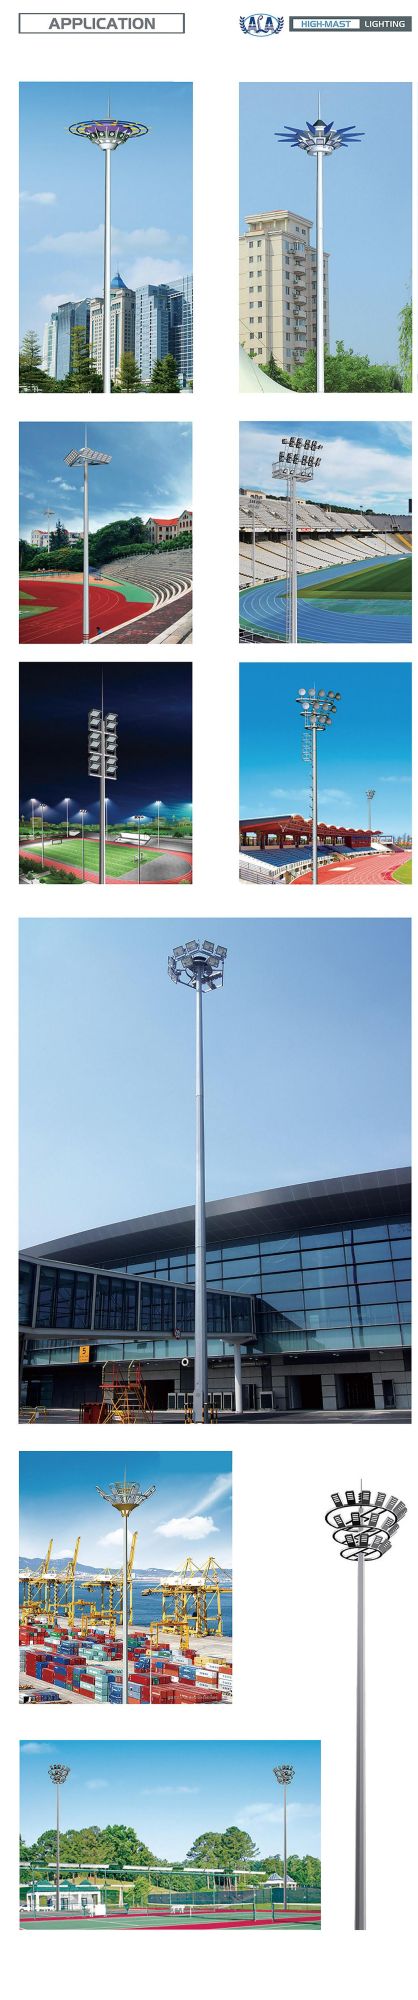 Ala Outdoor Commercial Area Lighting IP67 Waterproof 900W LED Parking Lot High Mast Light Adjustable Slip Fit Mount with Dusk to Dawn Photocell